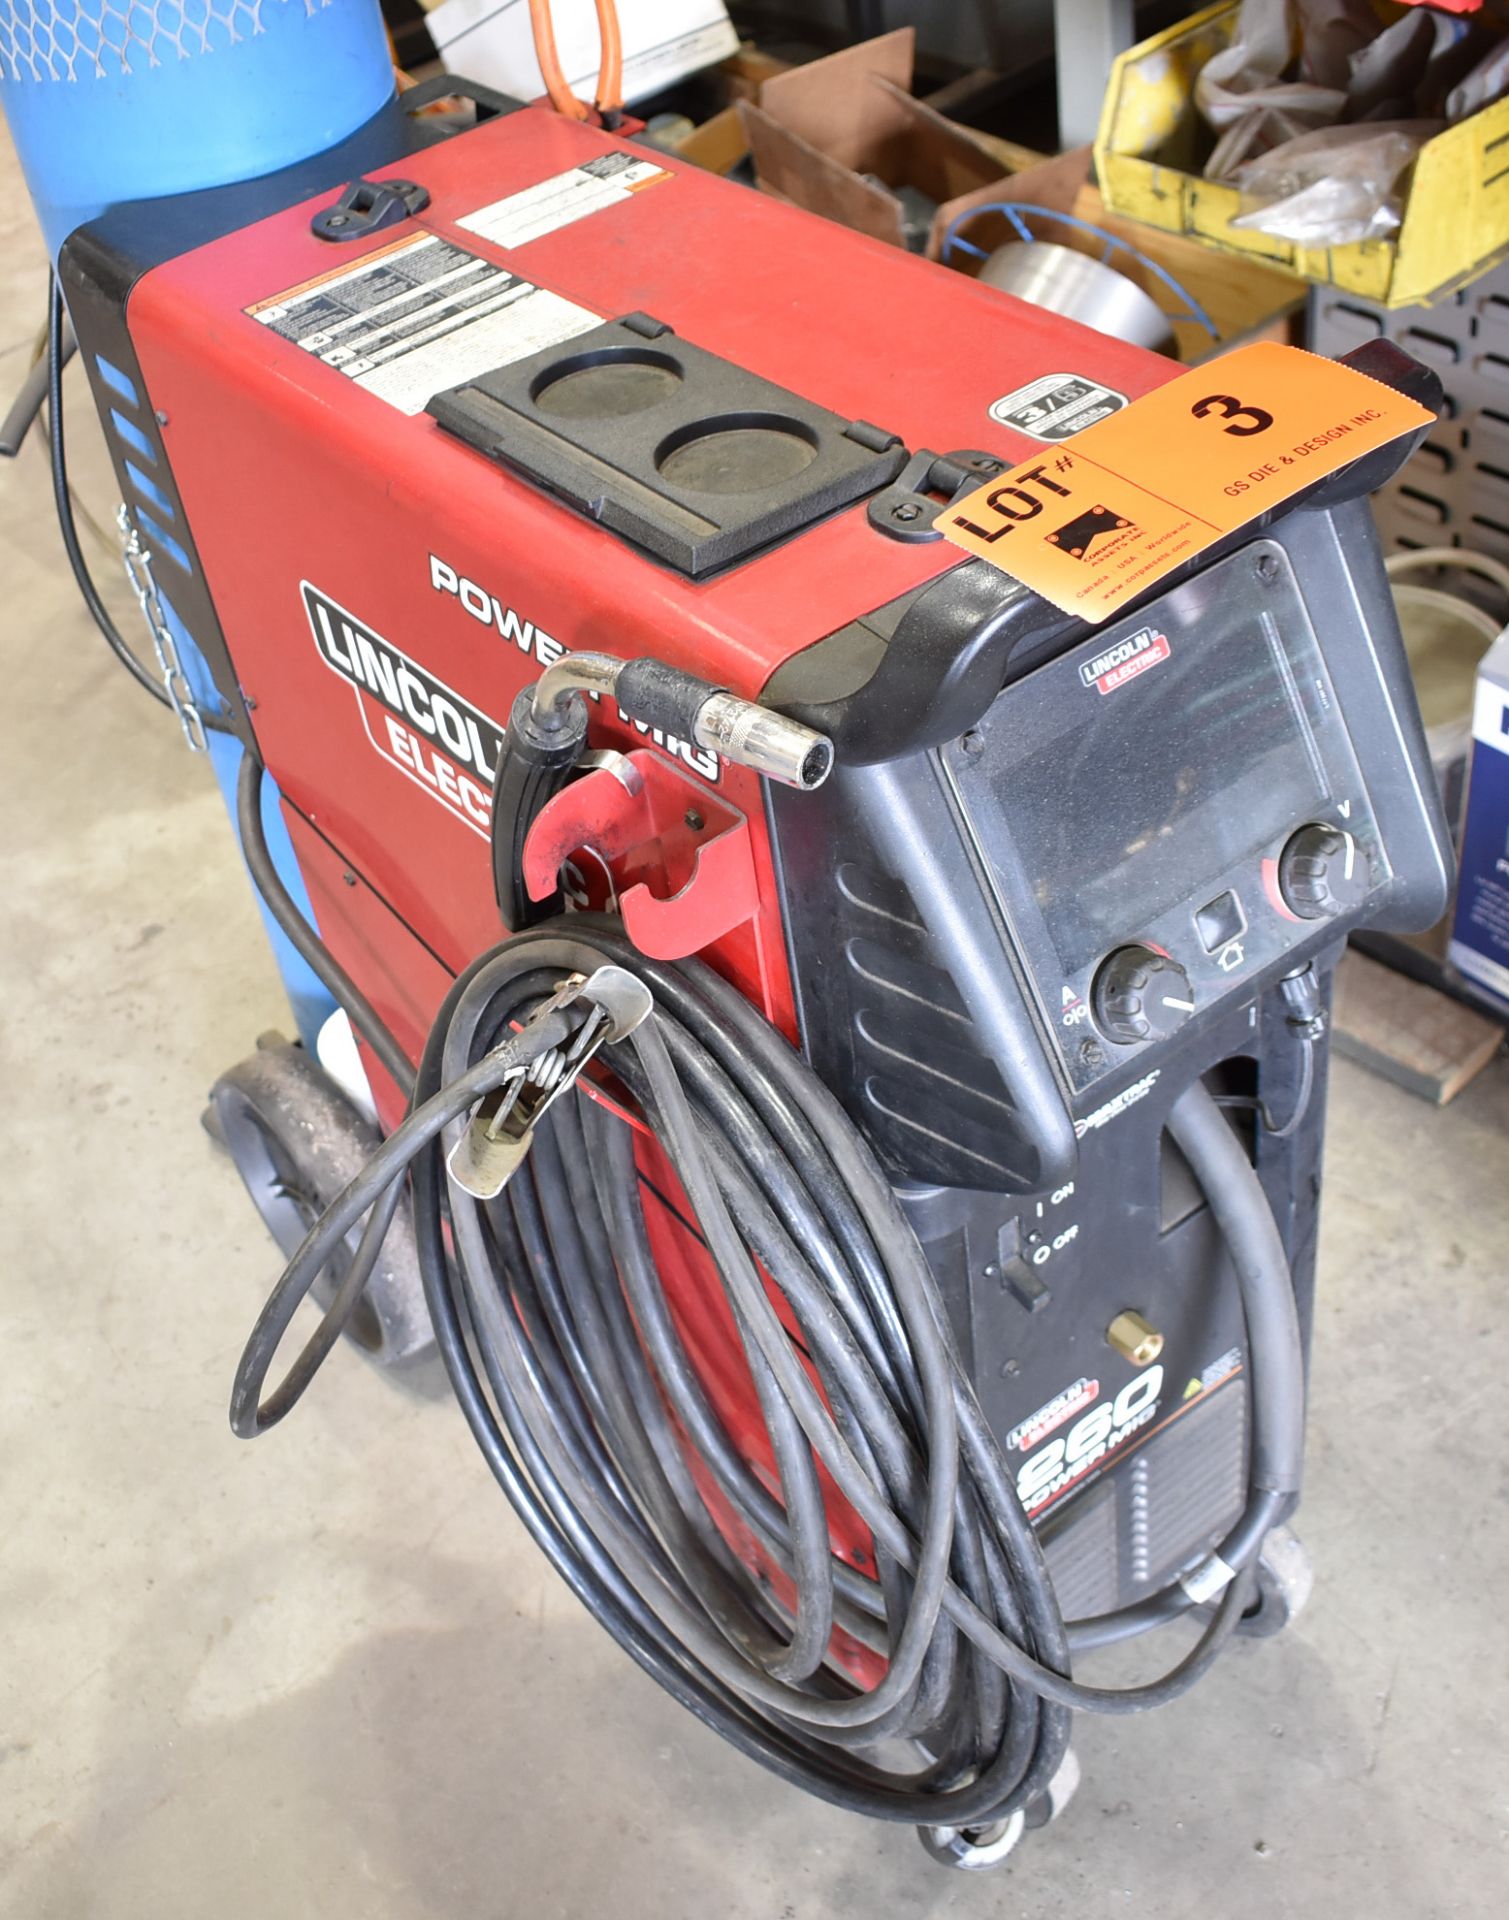 LINCOLN ELECTRIC POWER MIG 260 PORTABLE MIG WELDER WITH DIGITAL CONTROL, MAXTRAC WIRE DRIVE - Image 2 of 5